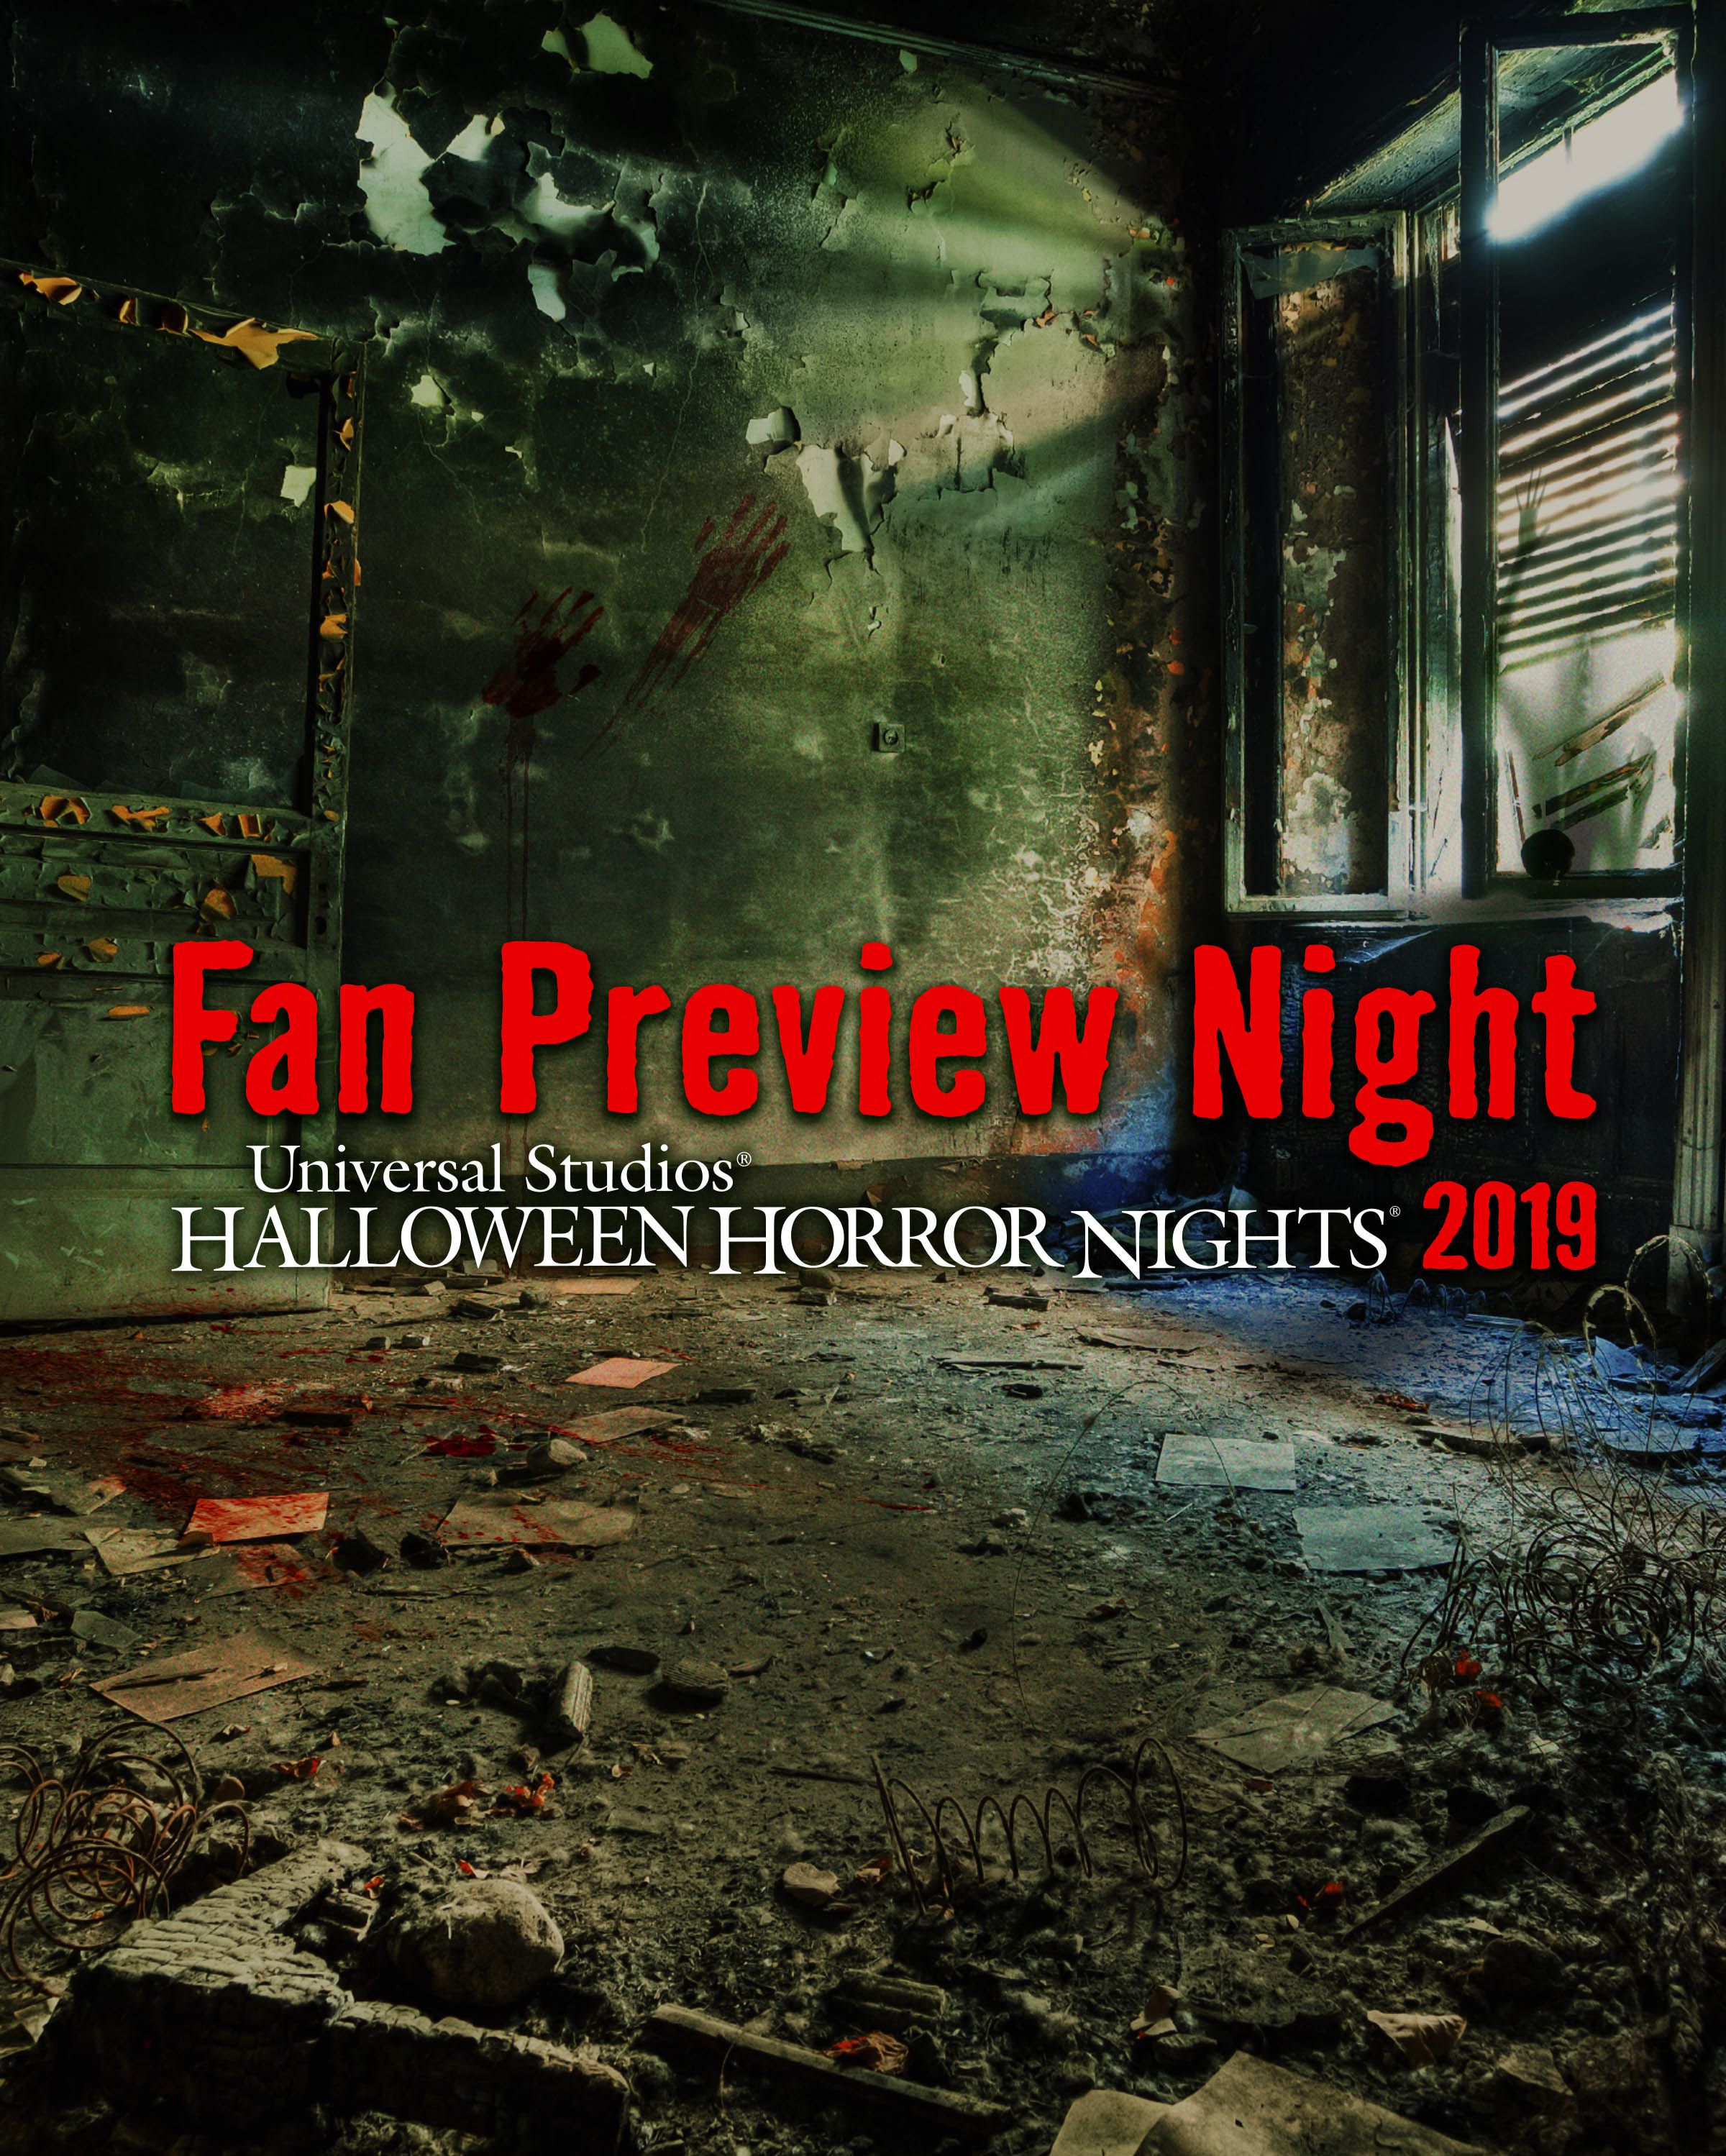 Halloween Horror Nights Hollywood Gives Fans a Sneak Preview on